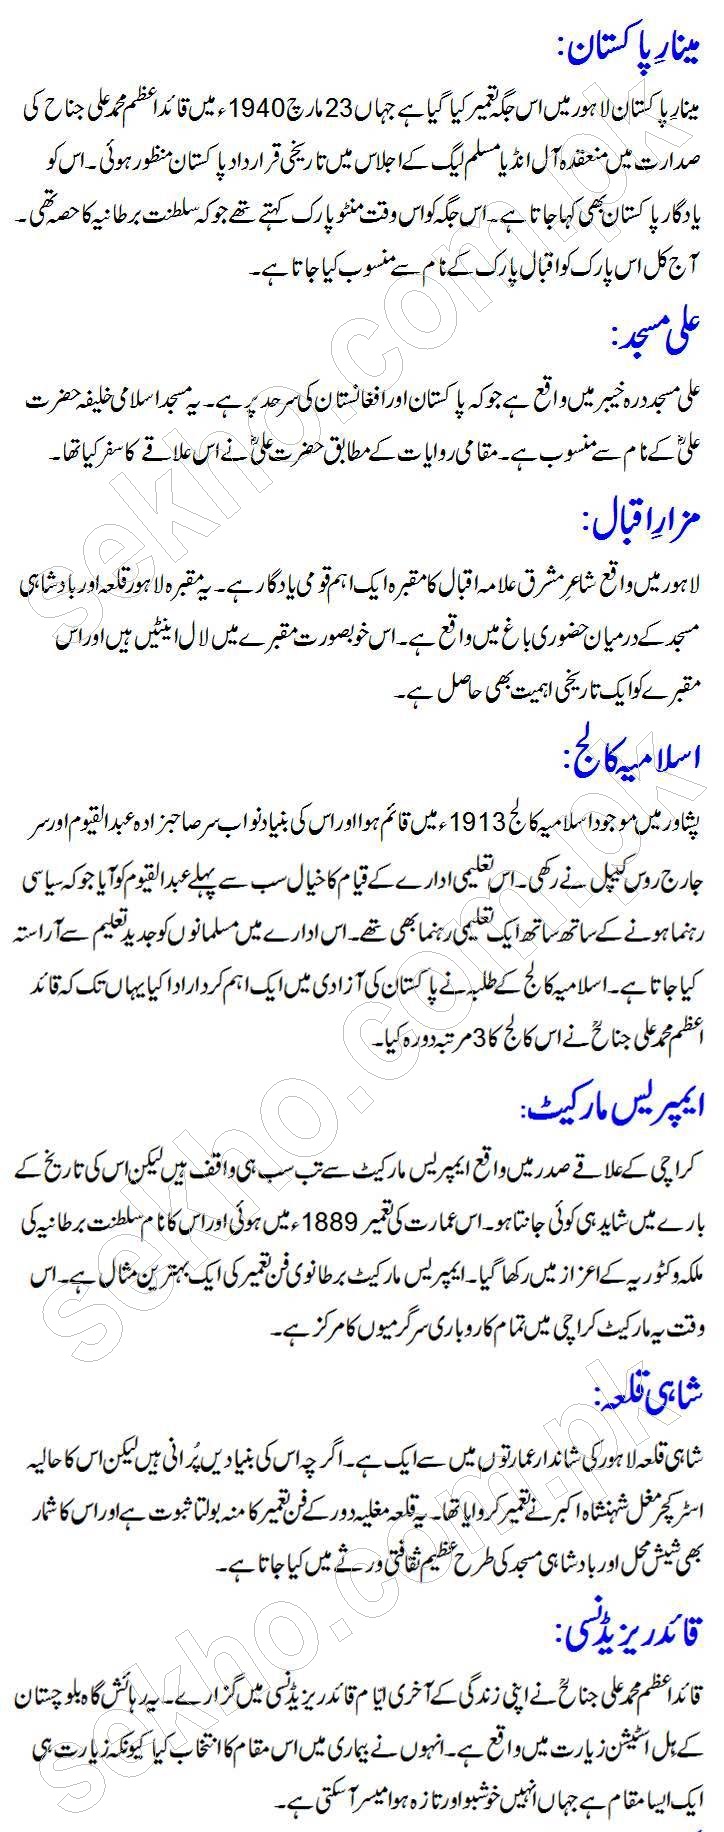 Pakistan Historical Places In Urdu Names With Information Essay